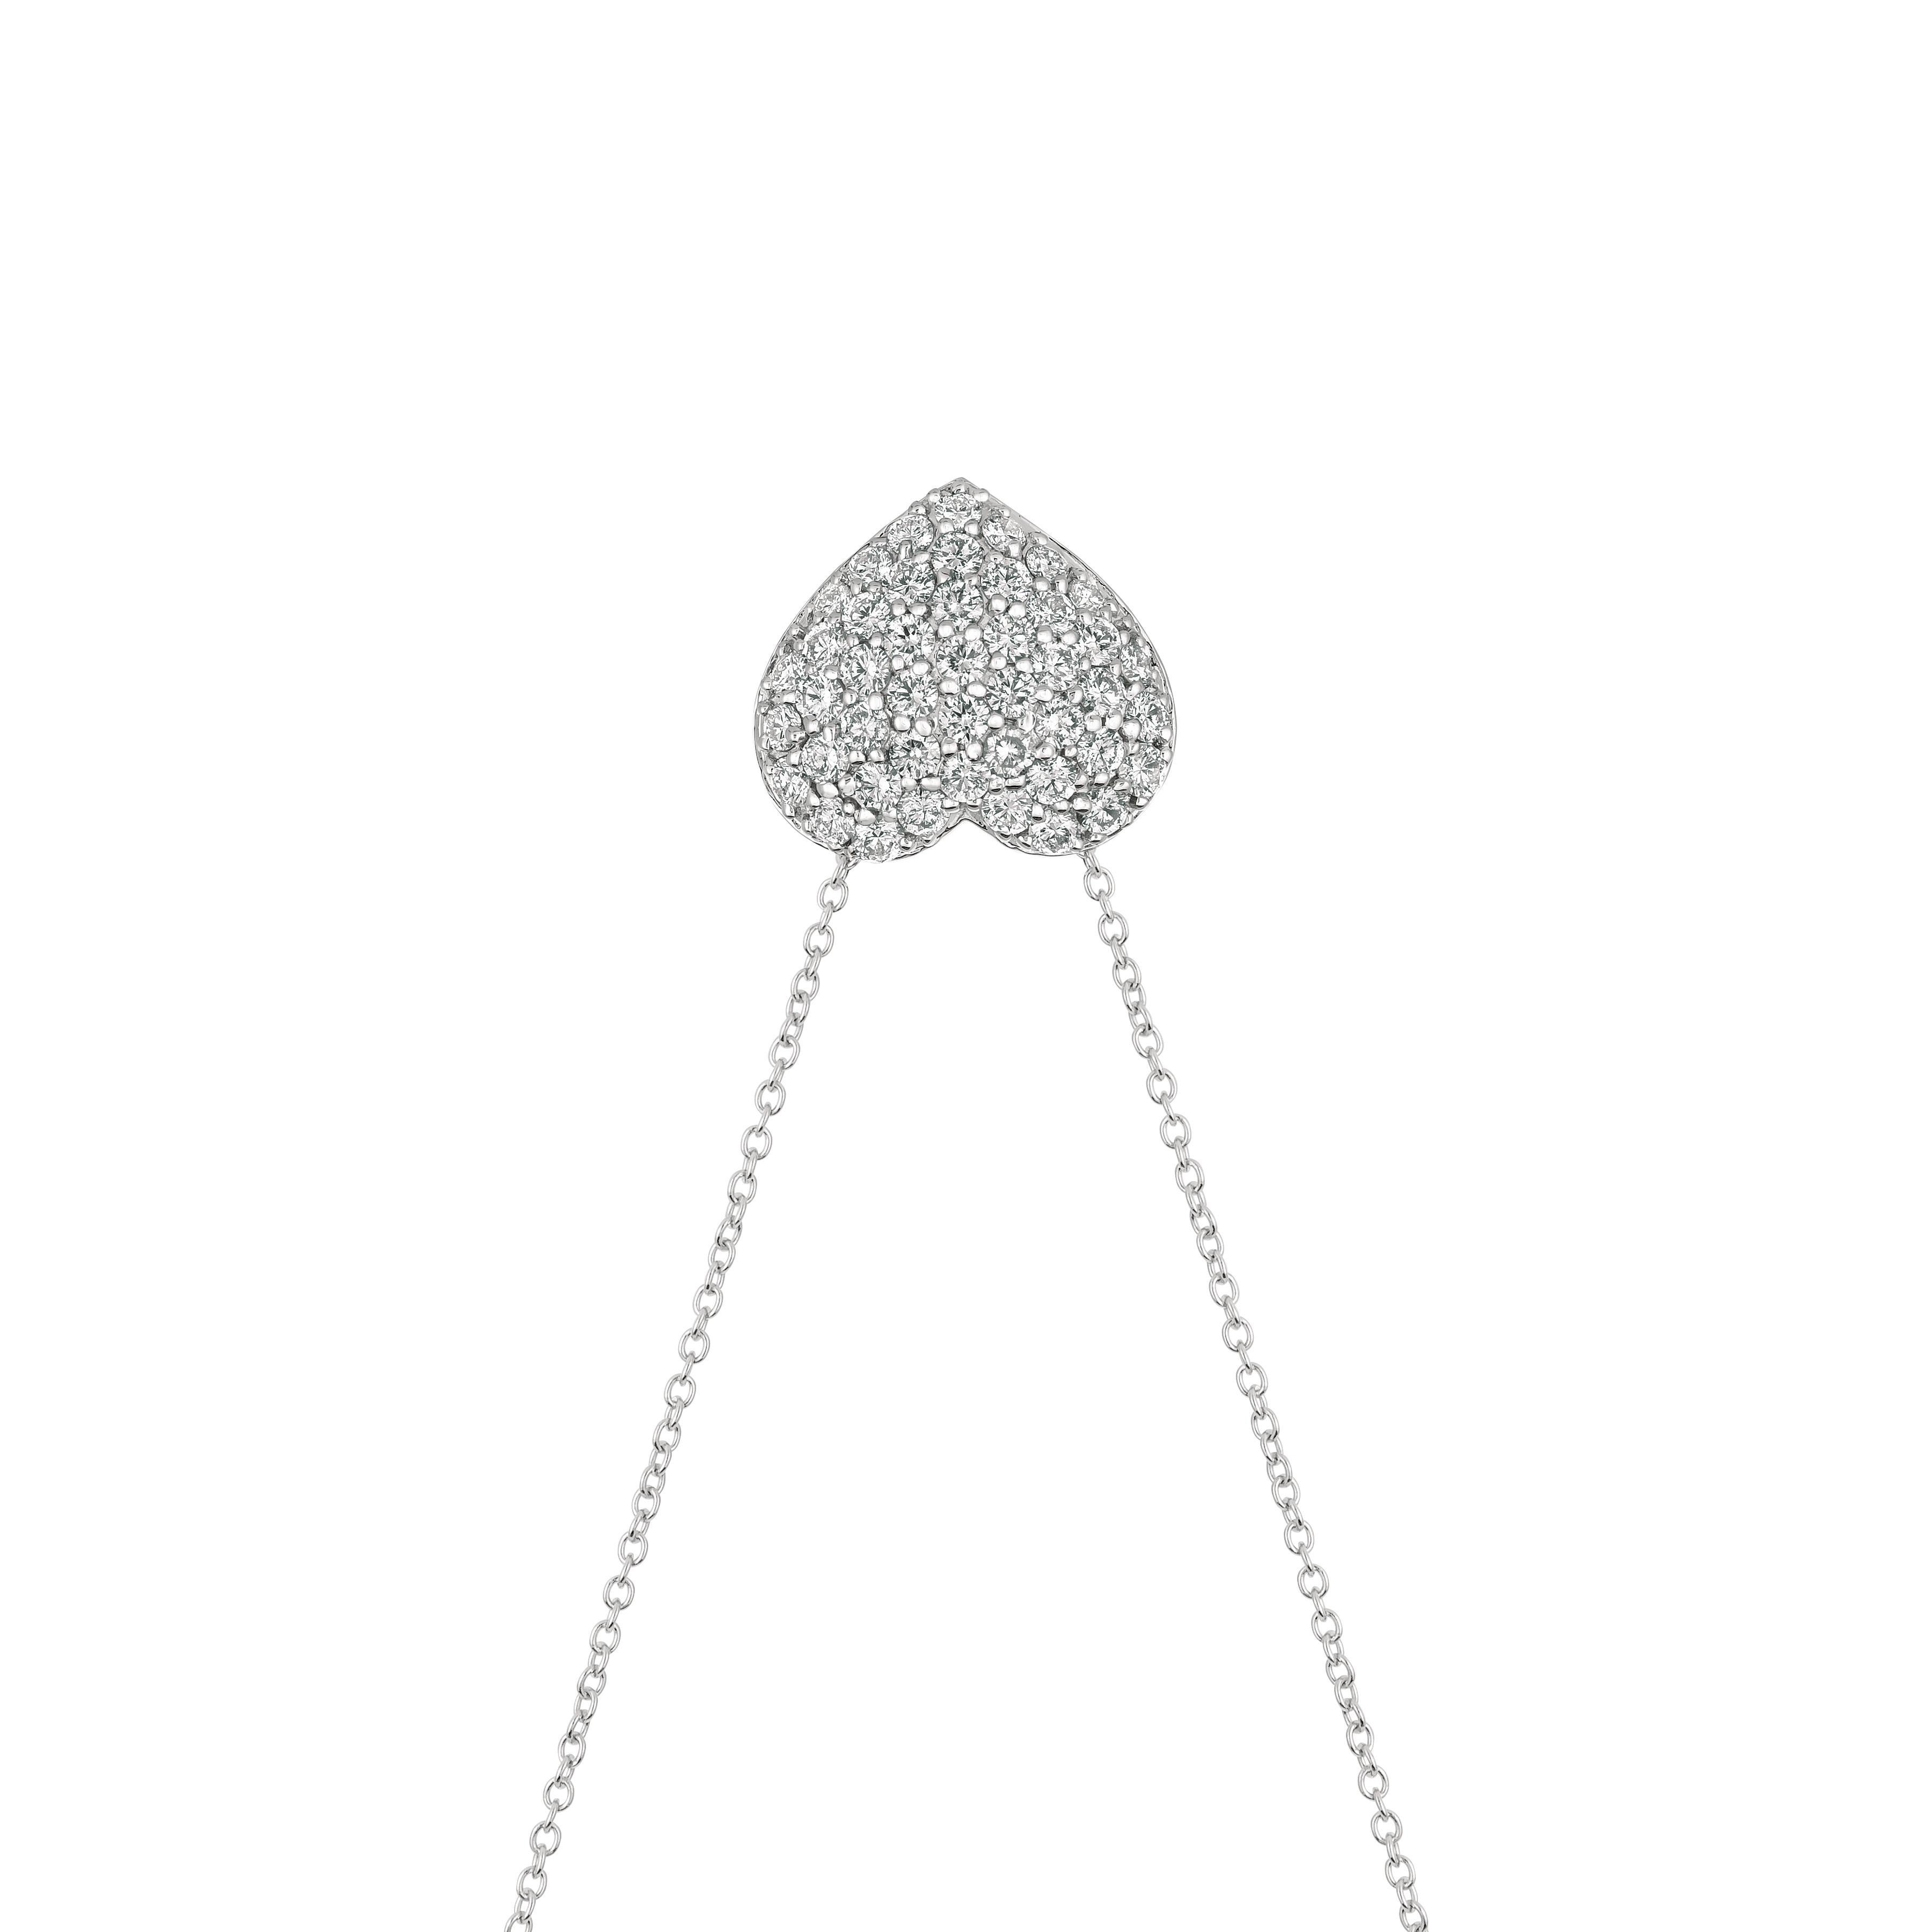 1.50 Carat Natural Diamond Heart Necklace 14K White Gold G SI 18 inches chain

100% Natural Diamonds, Not Enhanced in any way Round Cut Diamond Necklace
1.50CT
G-H
SI
5/8 inch in height, 11/16 inch in width
14K White Gold, Pave style, 5.7 grams
46